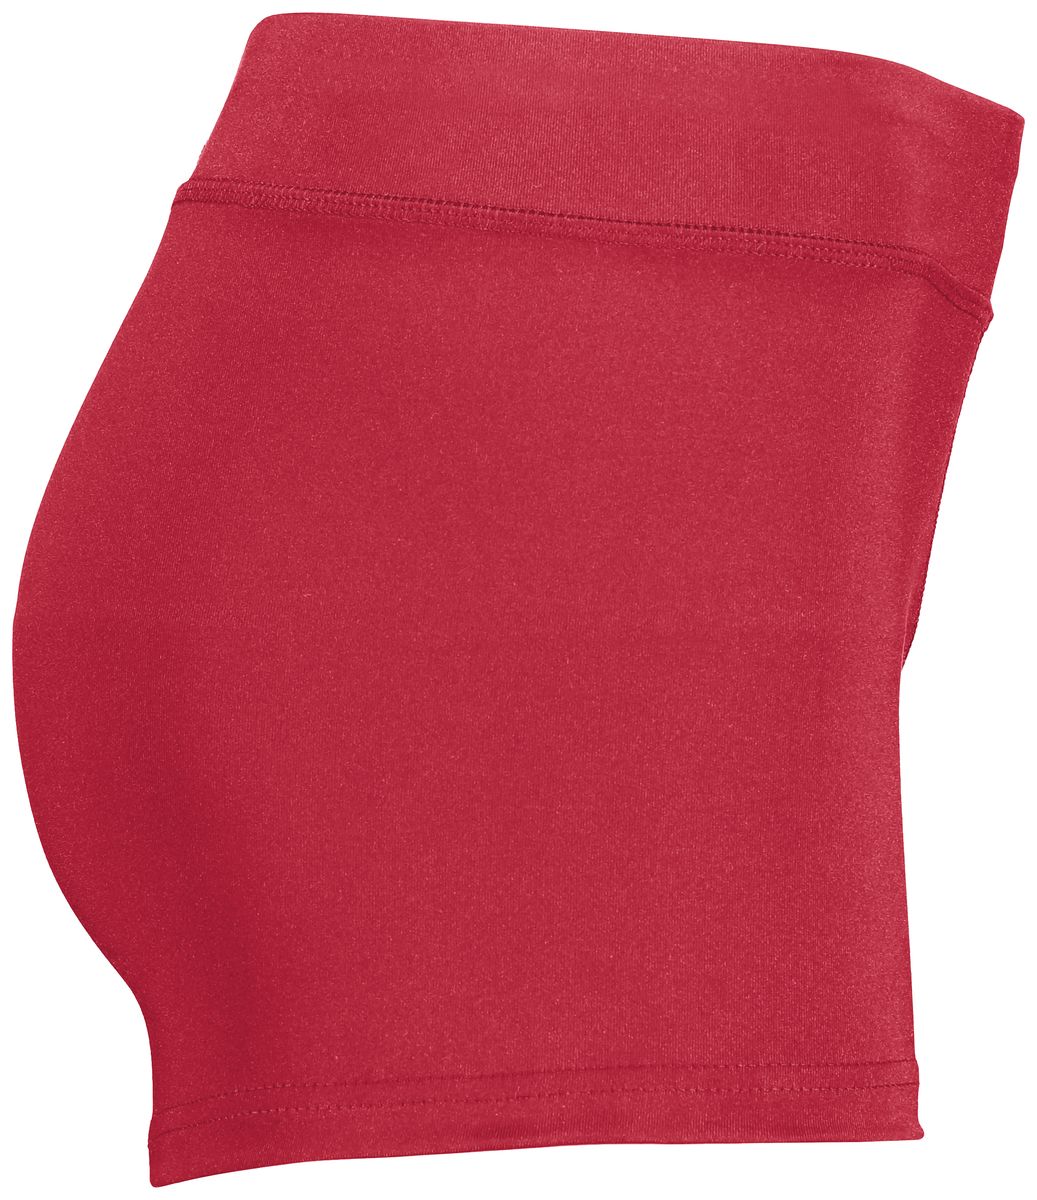 Augusta Women's TruHit Volleyball Shorts - image 5 of 5